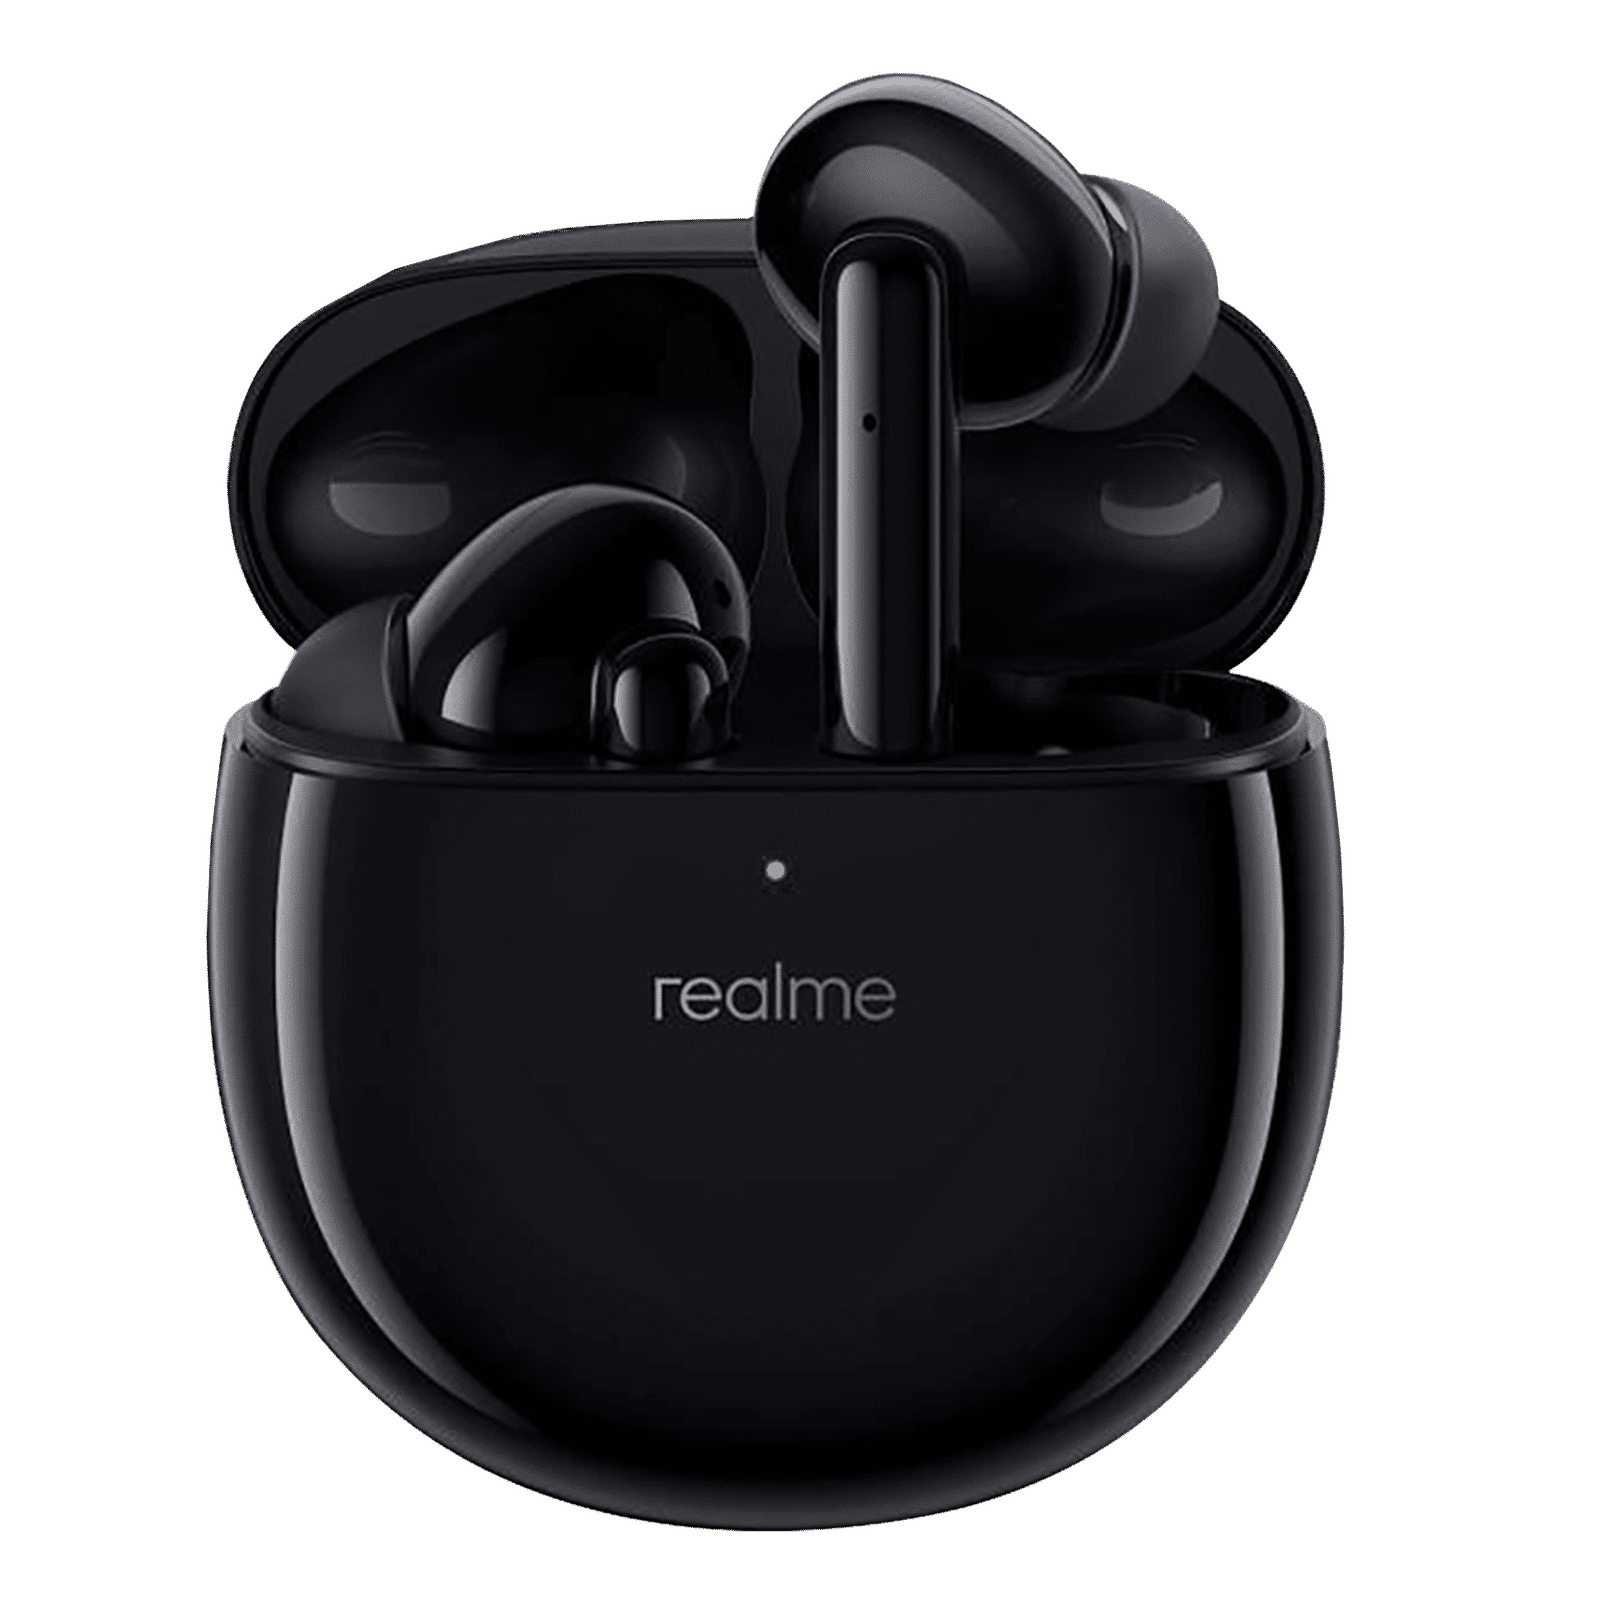  realme Buds Air 3 Wireless Earbuds, Active Noise